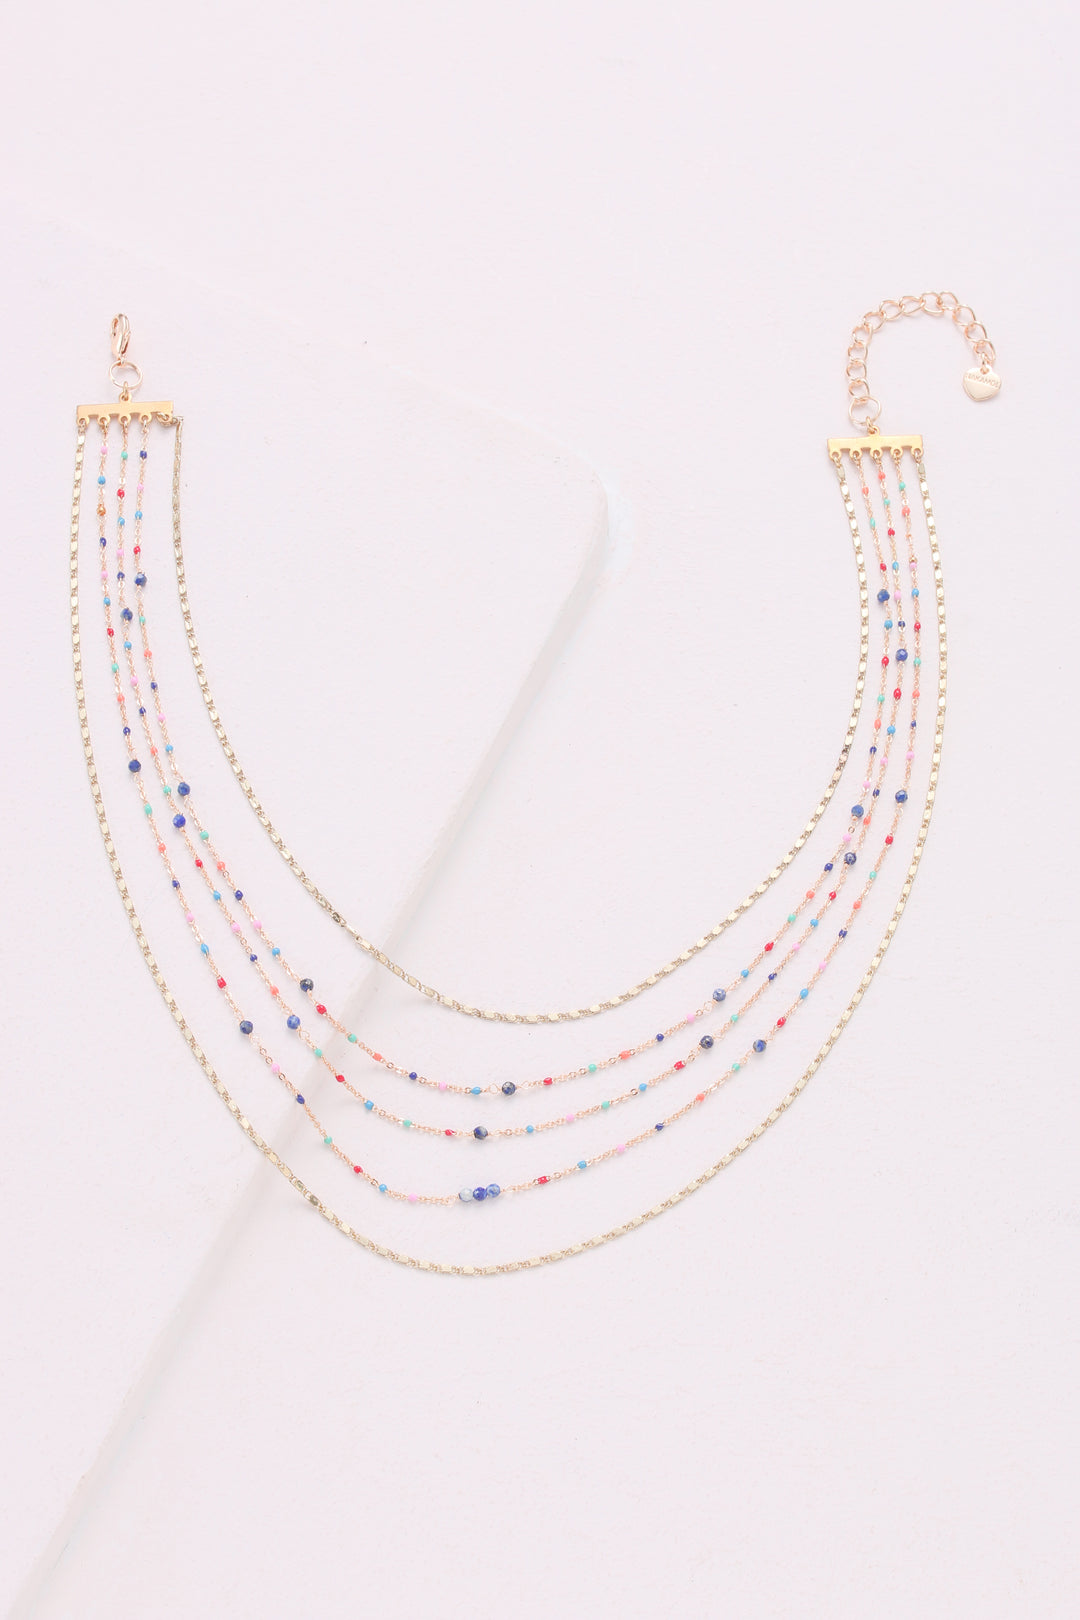 5 LAYER CHAIN AND BEADED NECKLACE - Kingfisher Road - Online Boutique